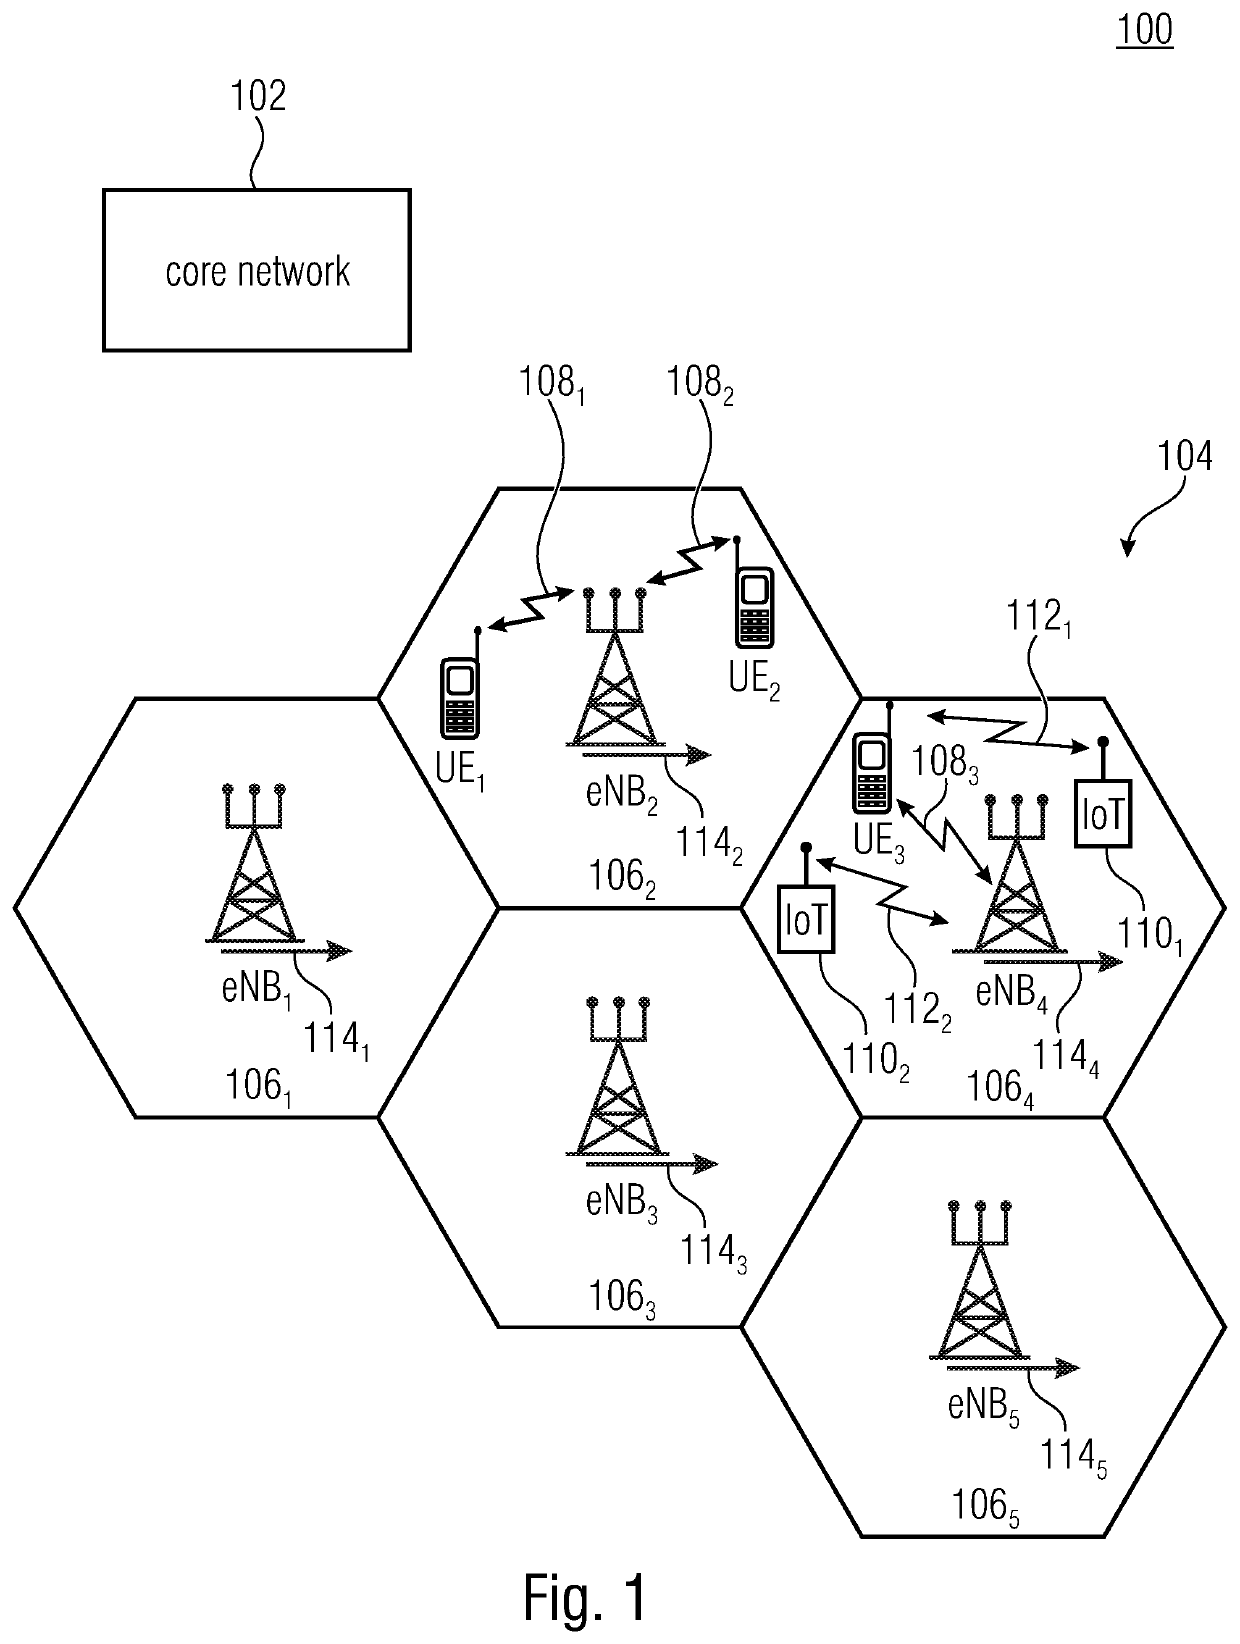 Reliable and low-latency transmission of data via a voice channel in a communication network